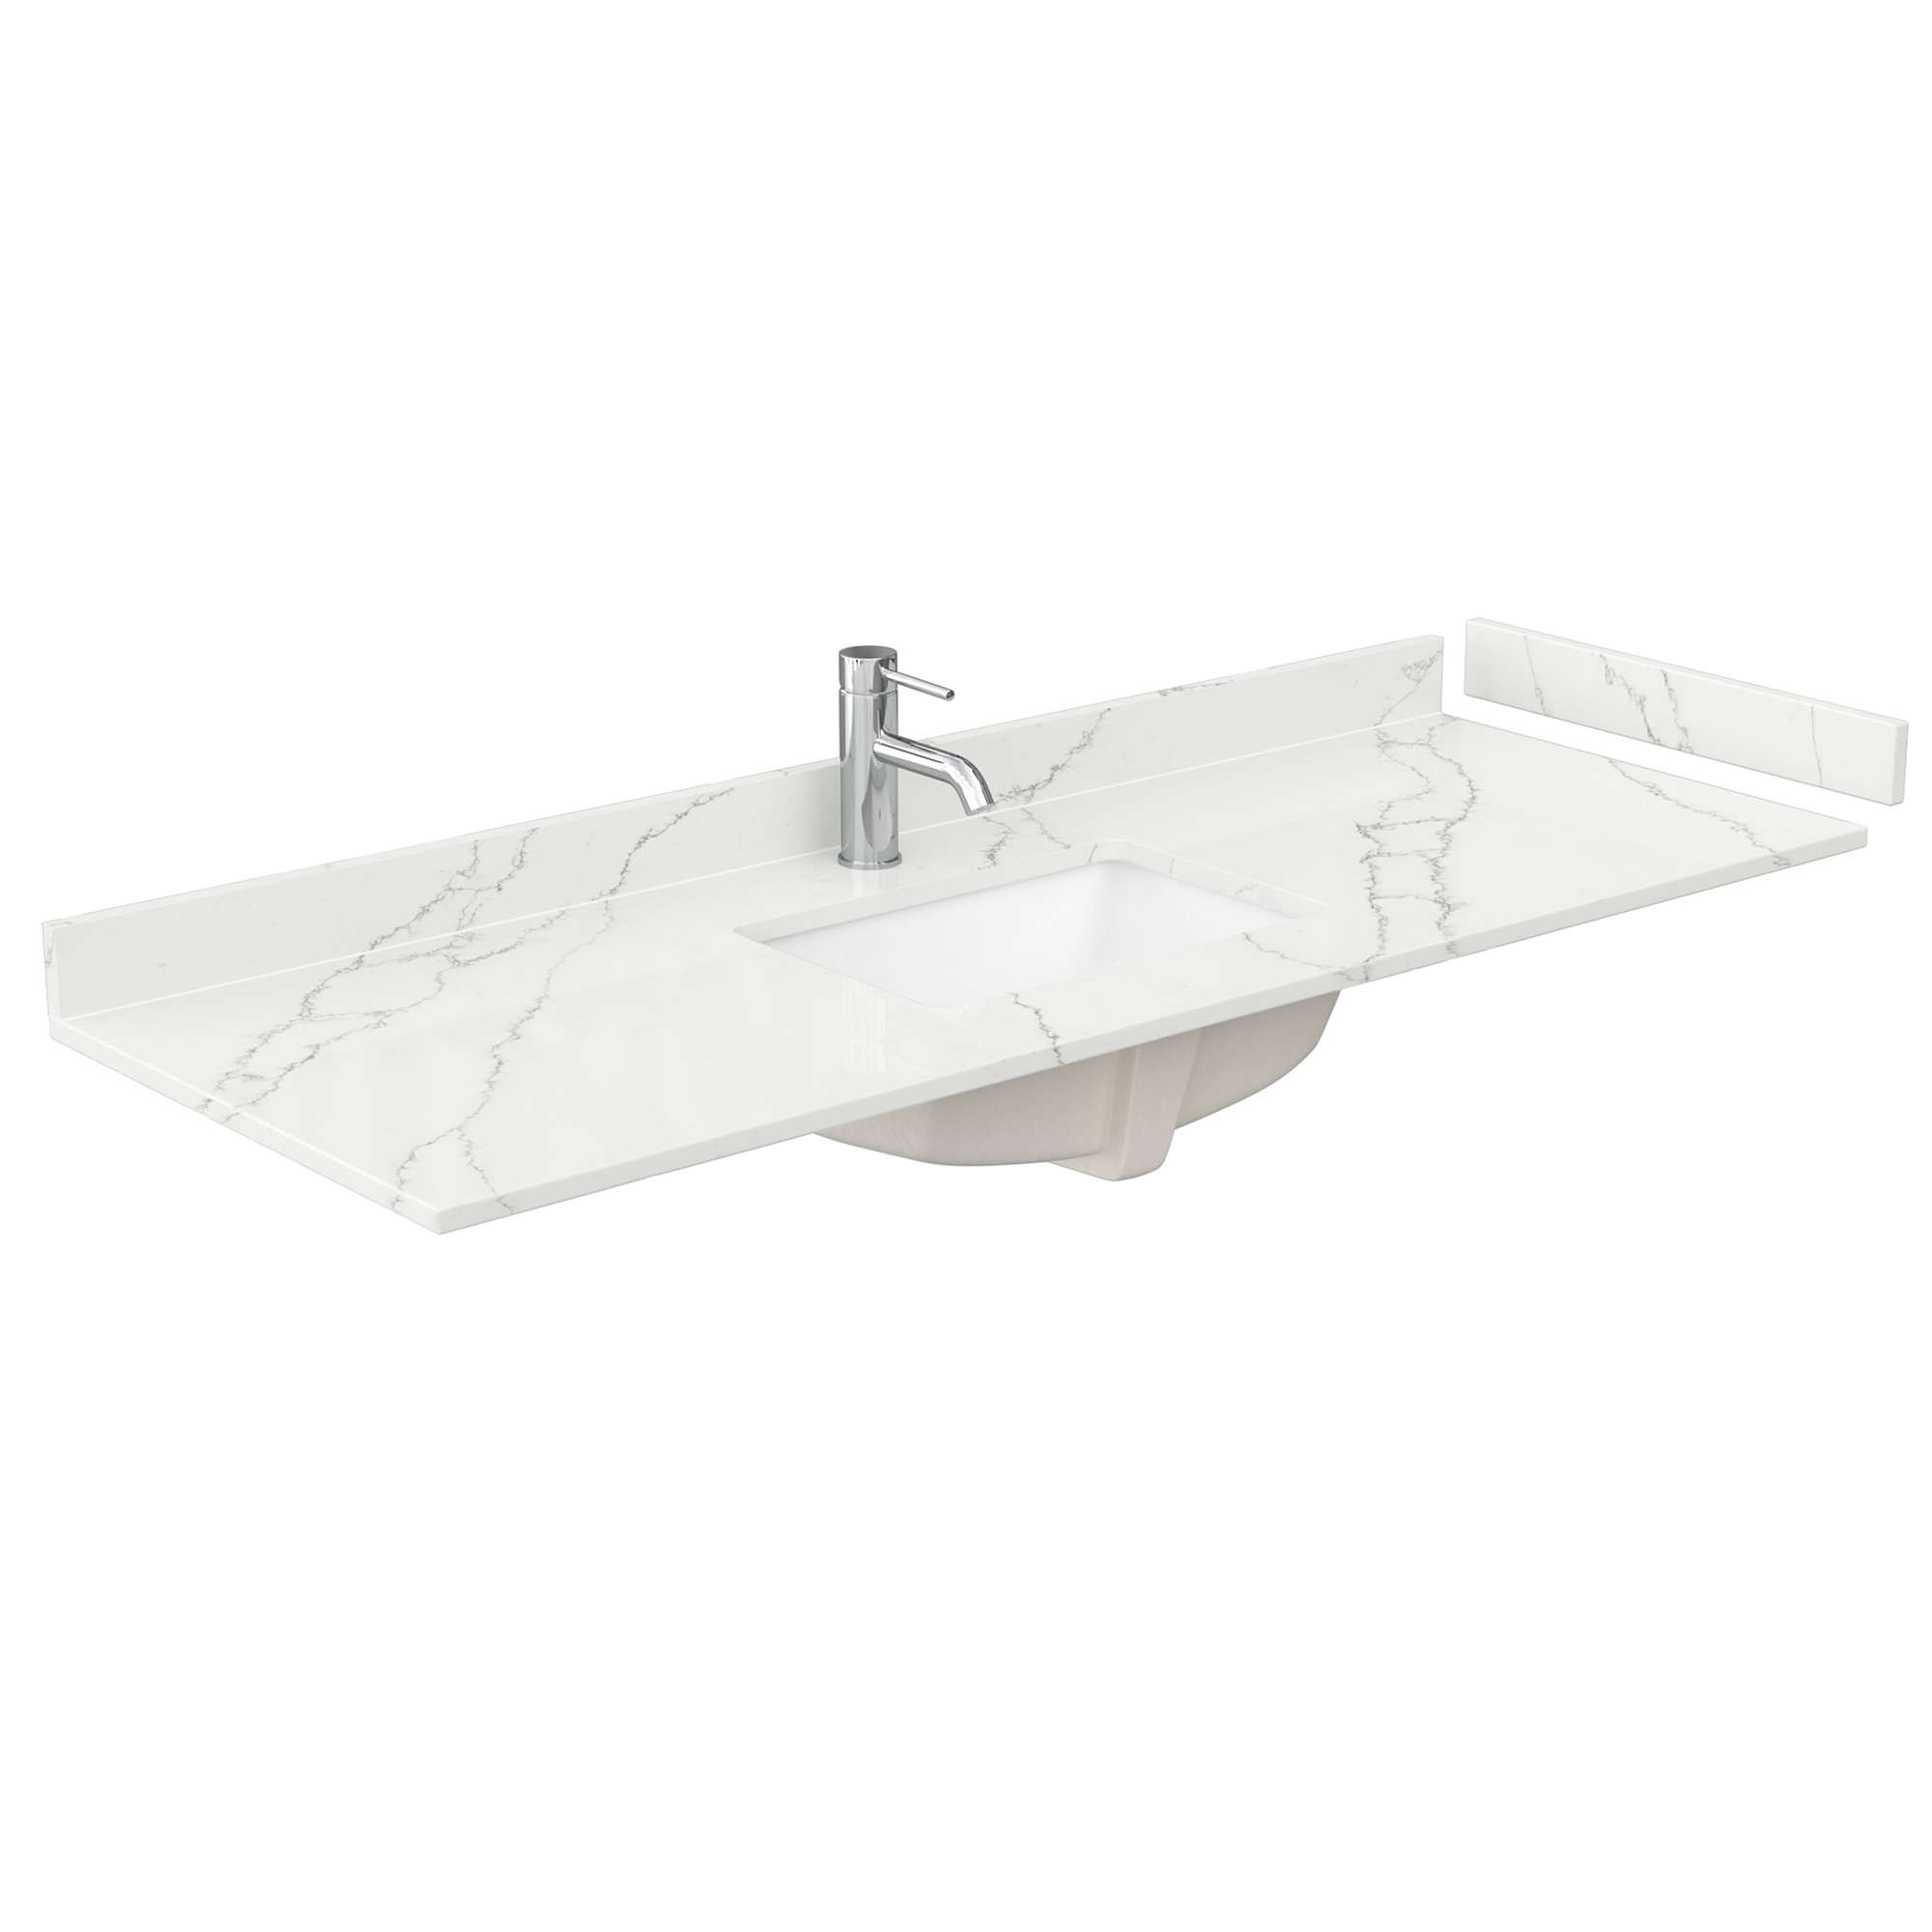 60" Single Countertop - Giotto Quartz (8066) with Undermount Square Sink (1-Hole) - Includes Backsplash and Sidesplash WCFQC160STOPUNSGT